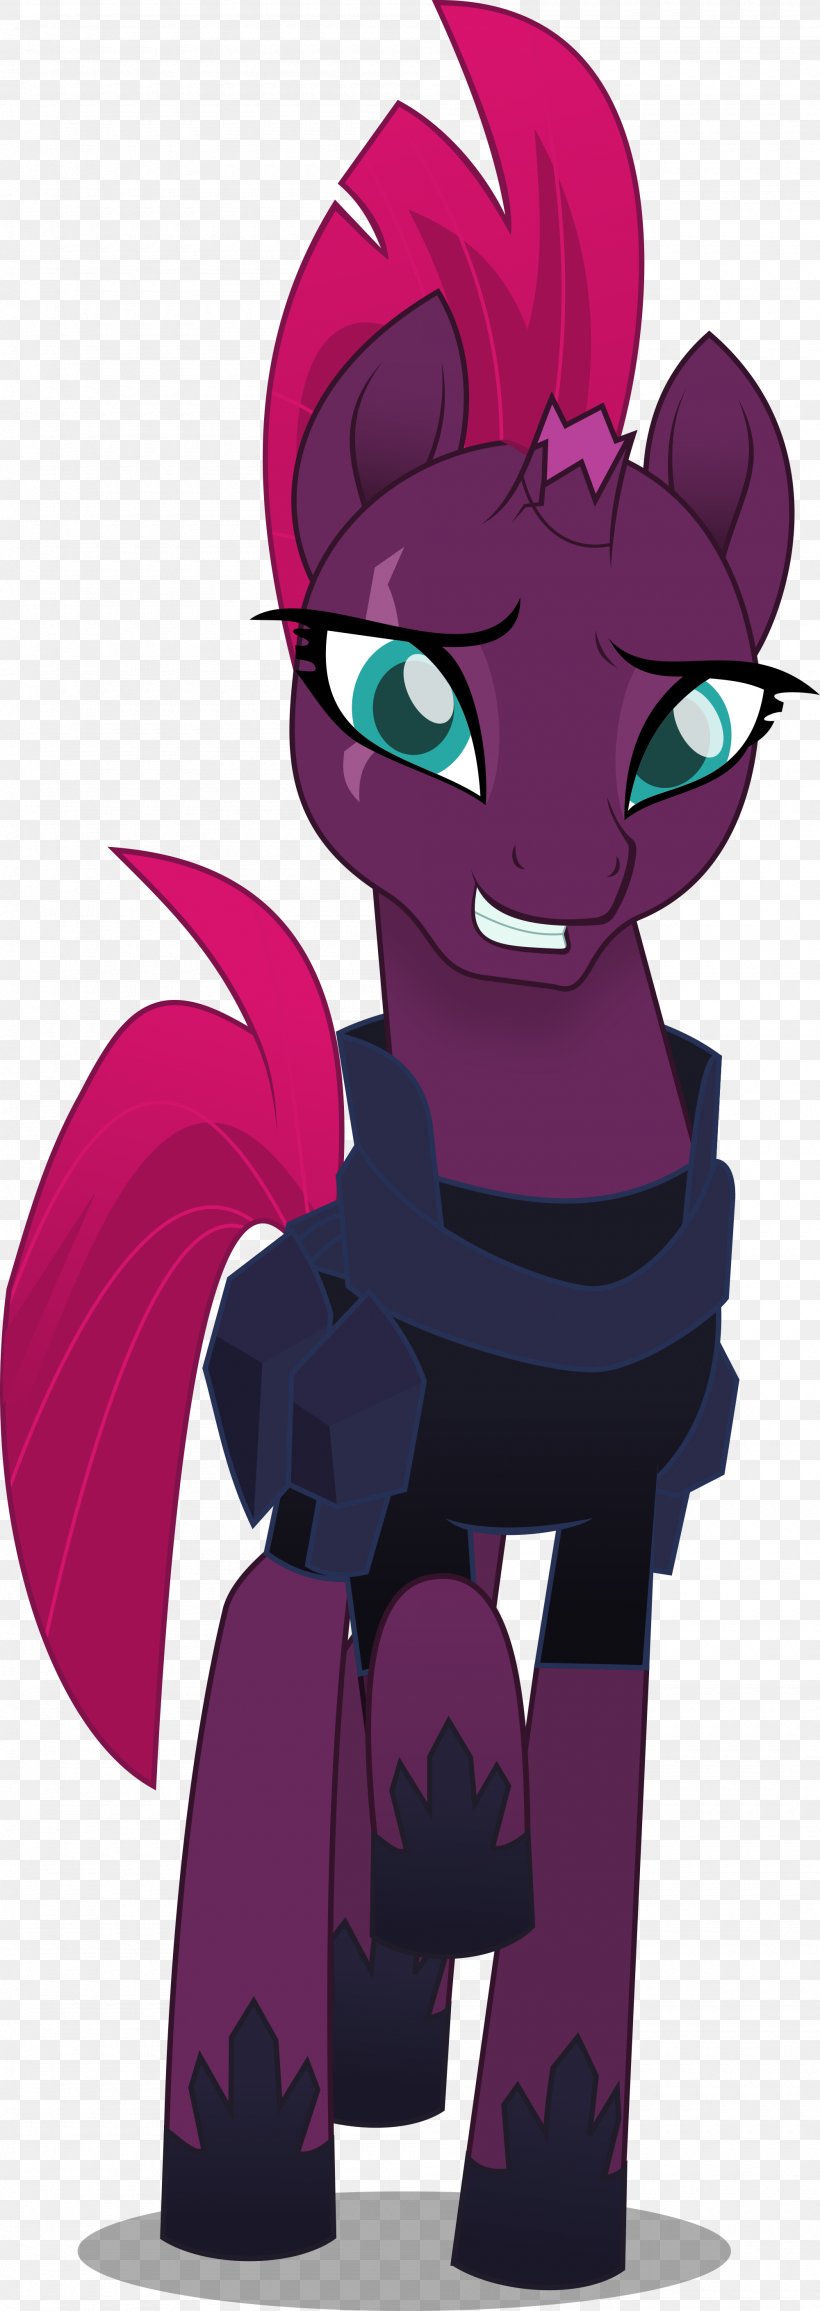 Tempest Shadow Rarity The Storm King Pony Sunset Shimmer, PNG, 2000x5637px, Tempest Shadow, Art, Canterlot, Cartoon, Deviantart Download Free